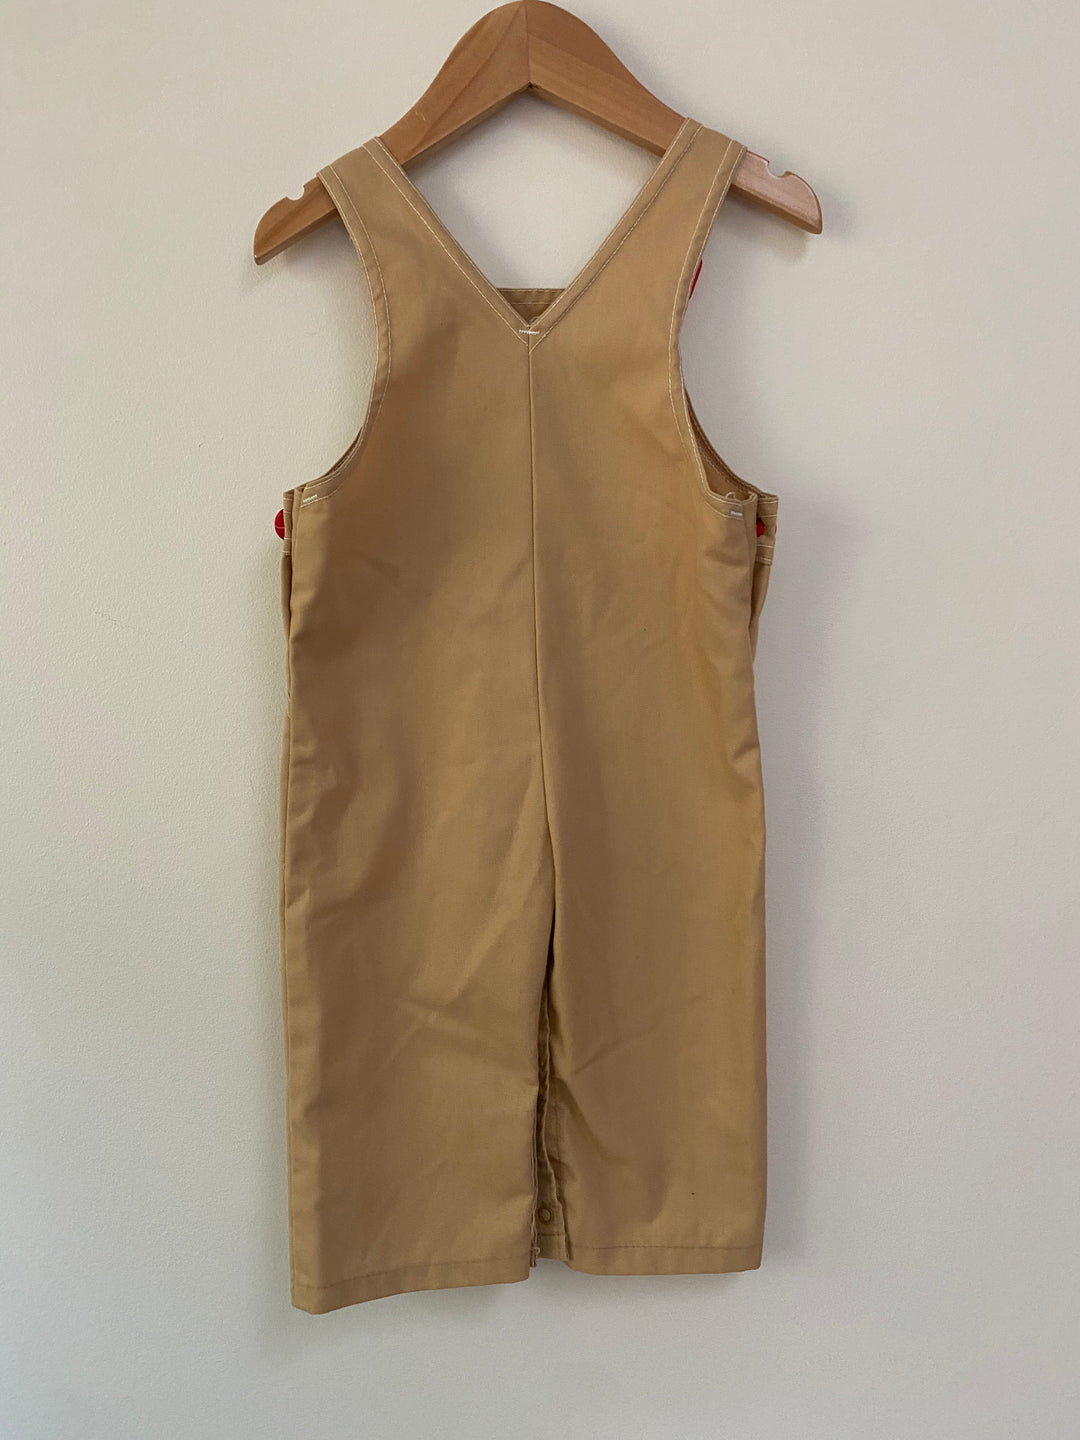 Vintage Carter's Overalls Sz ~18 mo